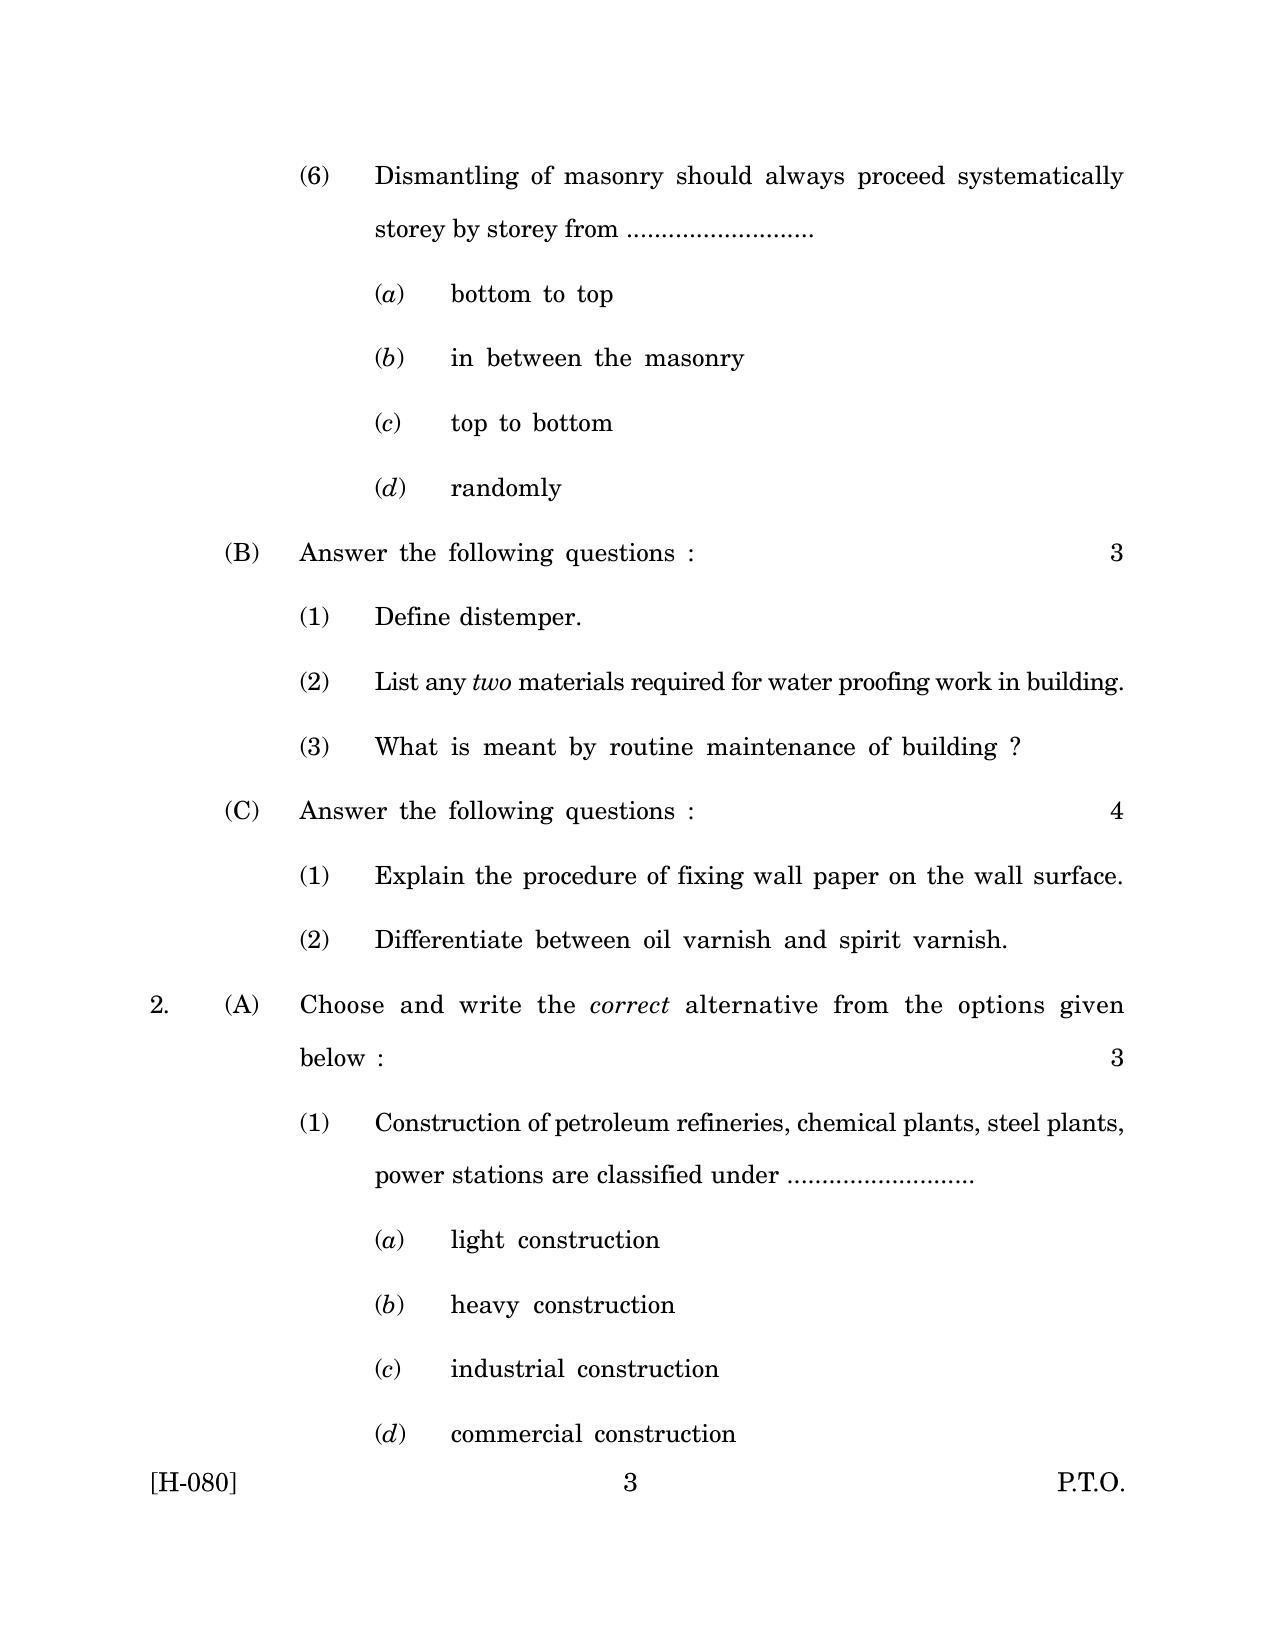 Goa Board Class 12 Construction   (March 2019) Question Paper - Page 3